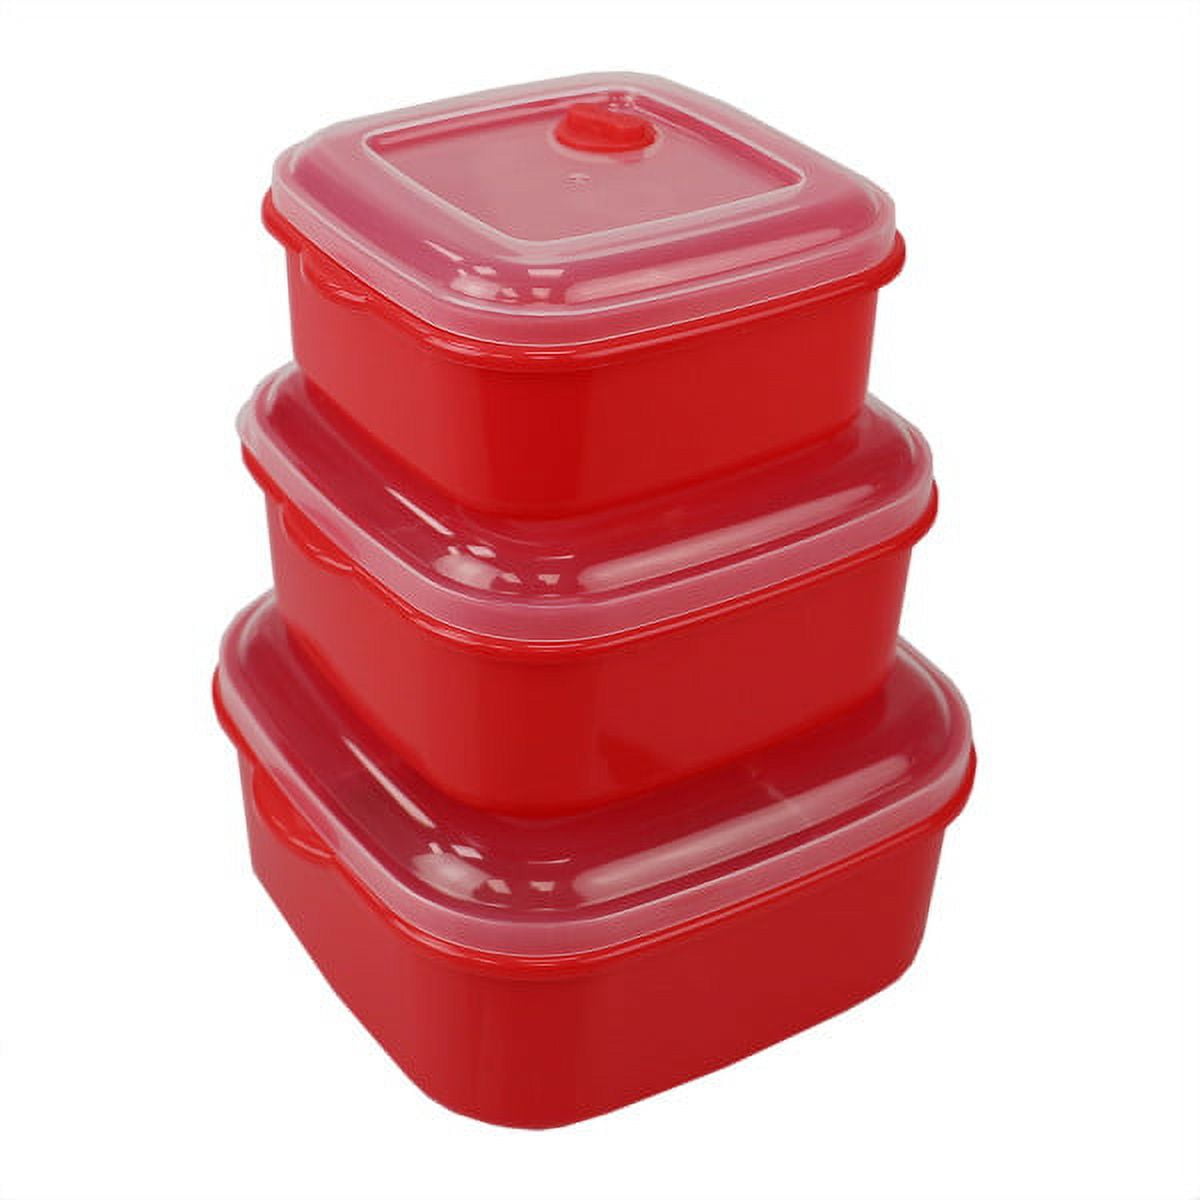 Semfri Food Storage Containers with Lids for Kitchen Organization 14 Pack  Plastic Kitchen Storage Containers for Pantry Organization and Storage 